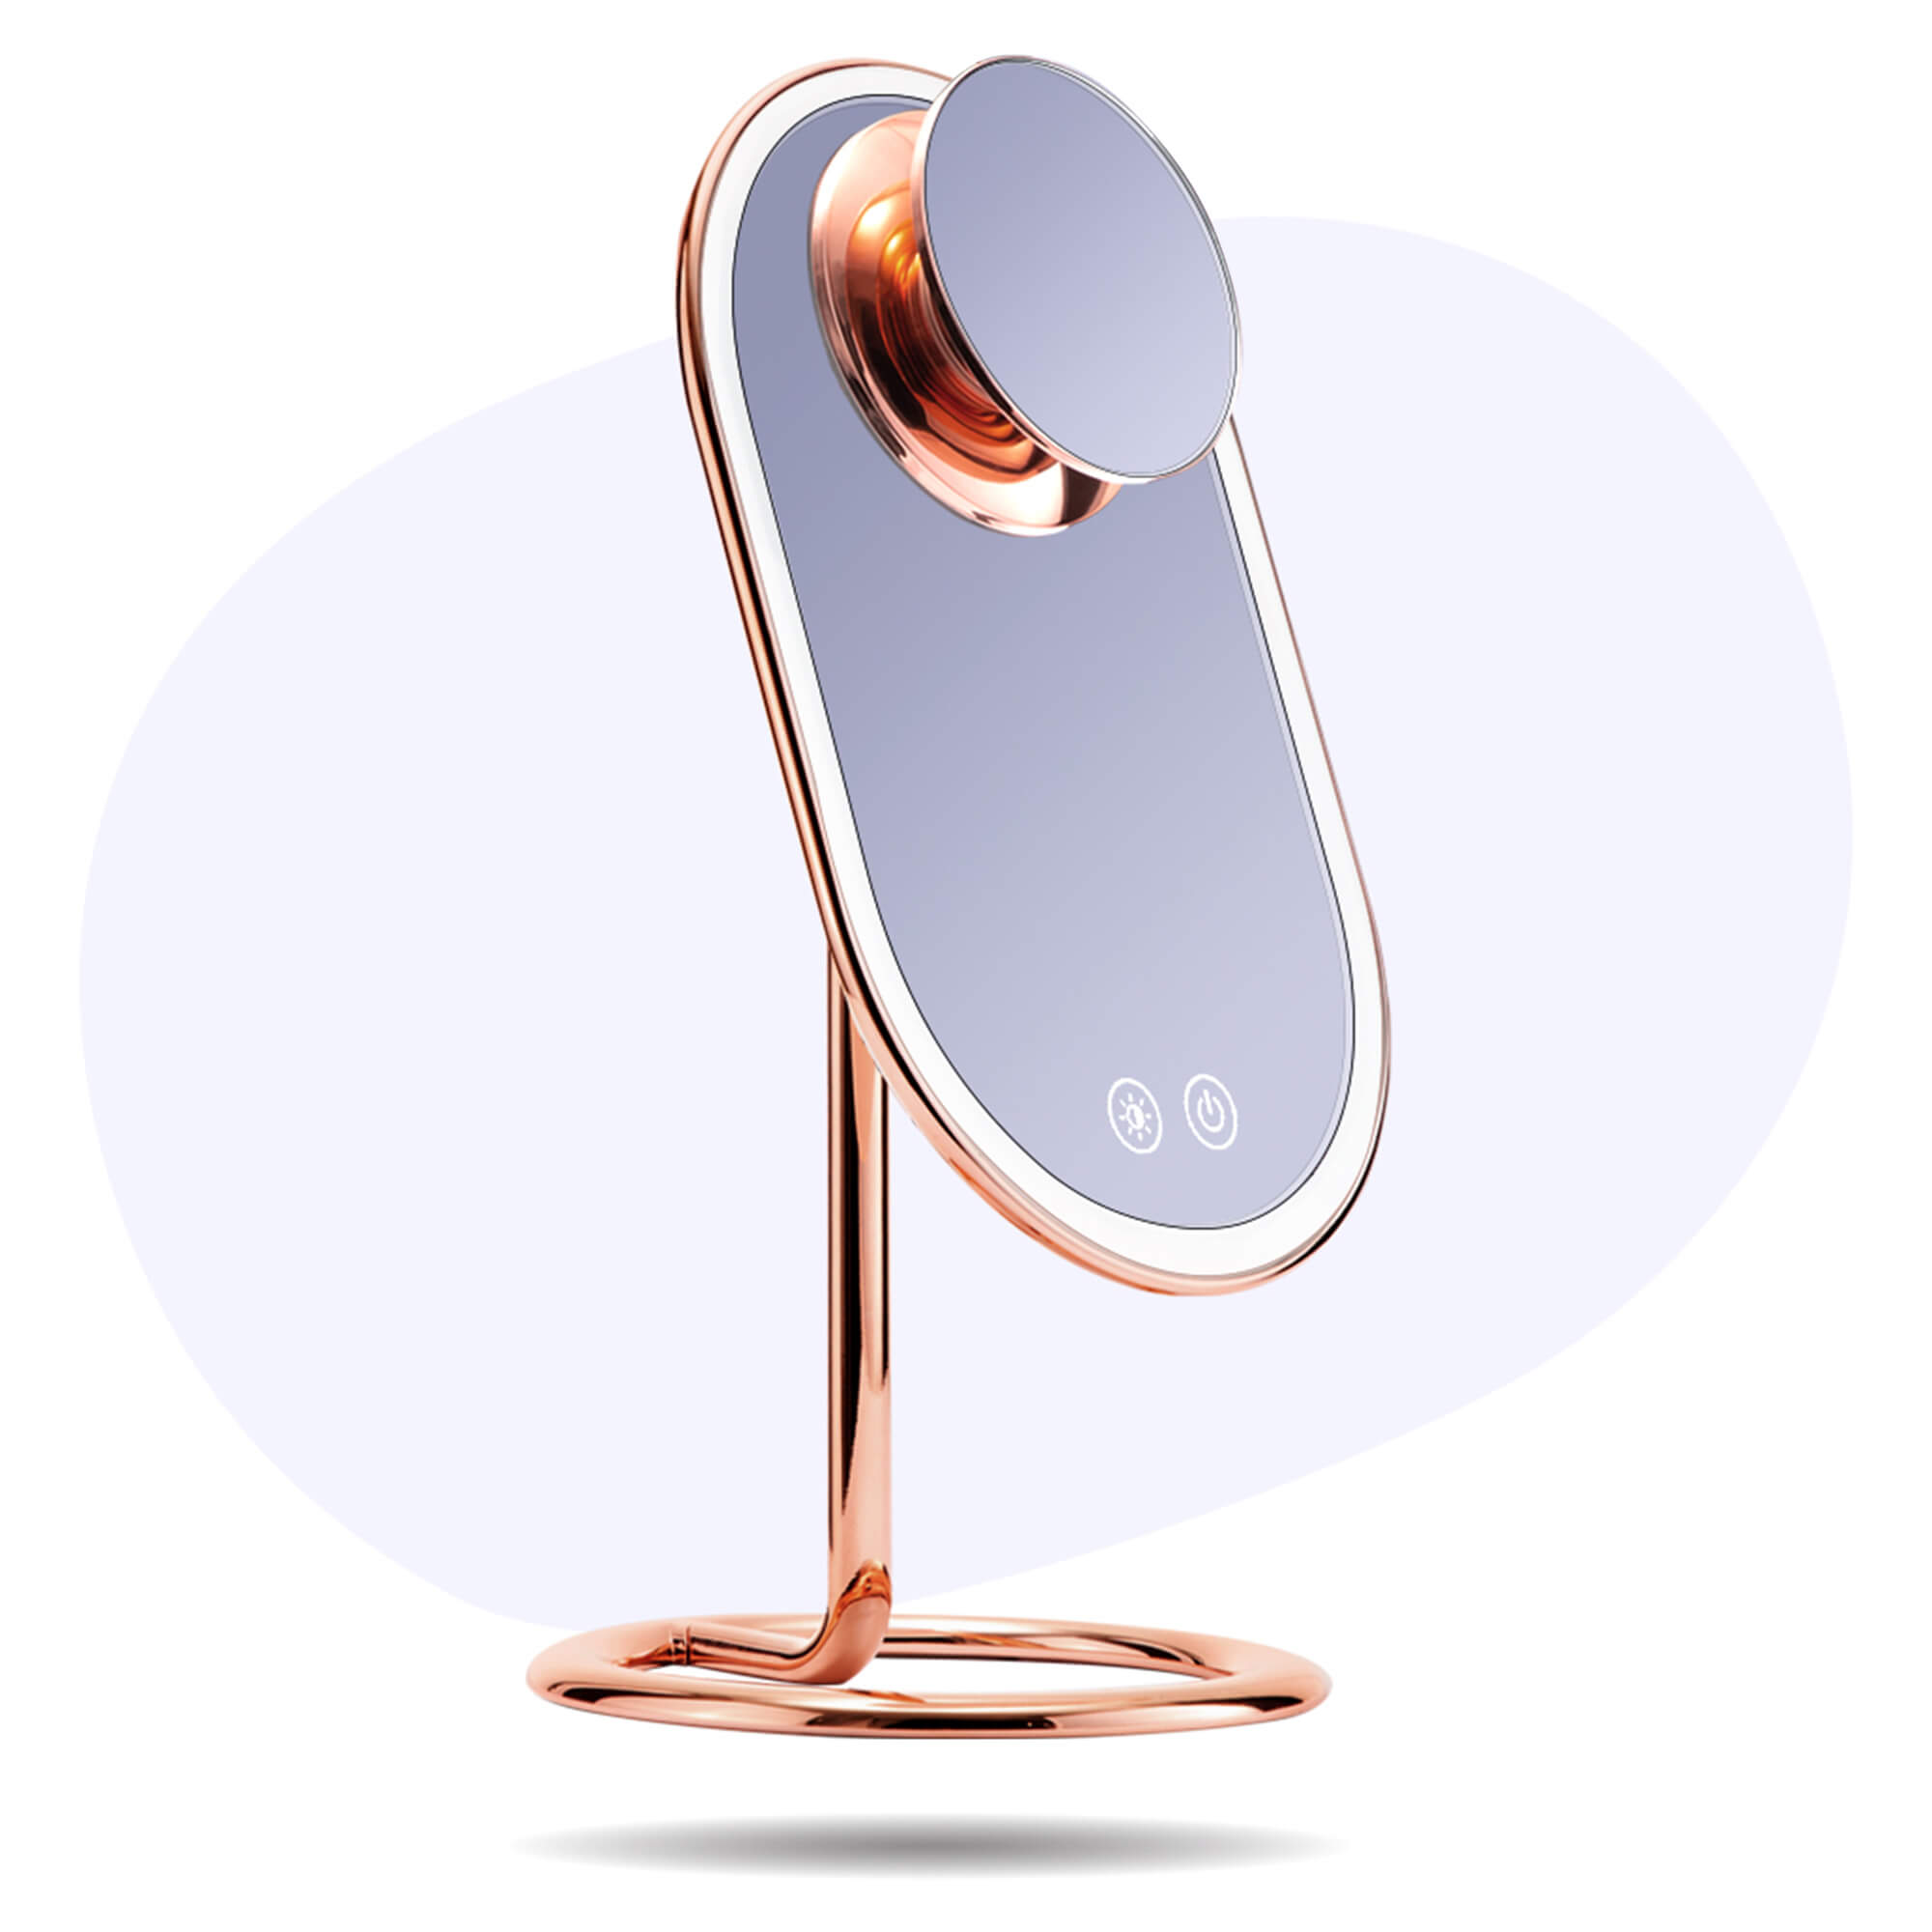 Vera premium lighted vanity mirror with 10x magnifying mirror attachment in rose gold.